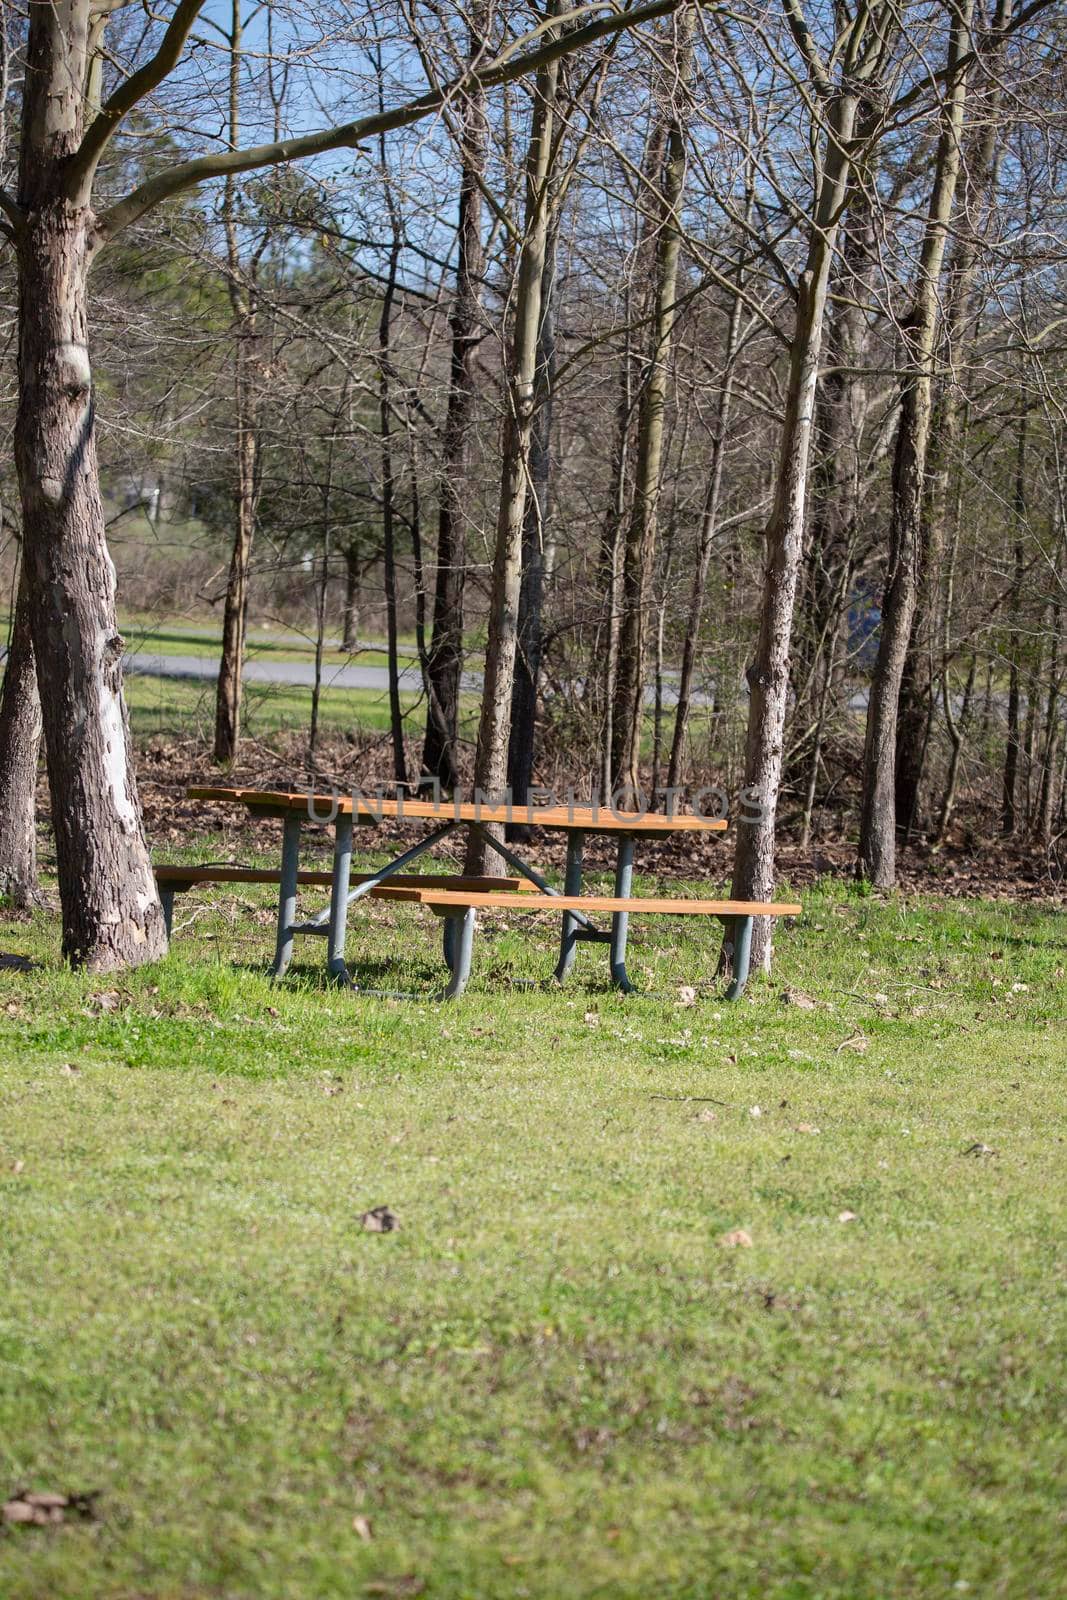 Empty picnic table near trees in a peaceful park